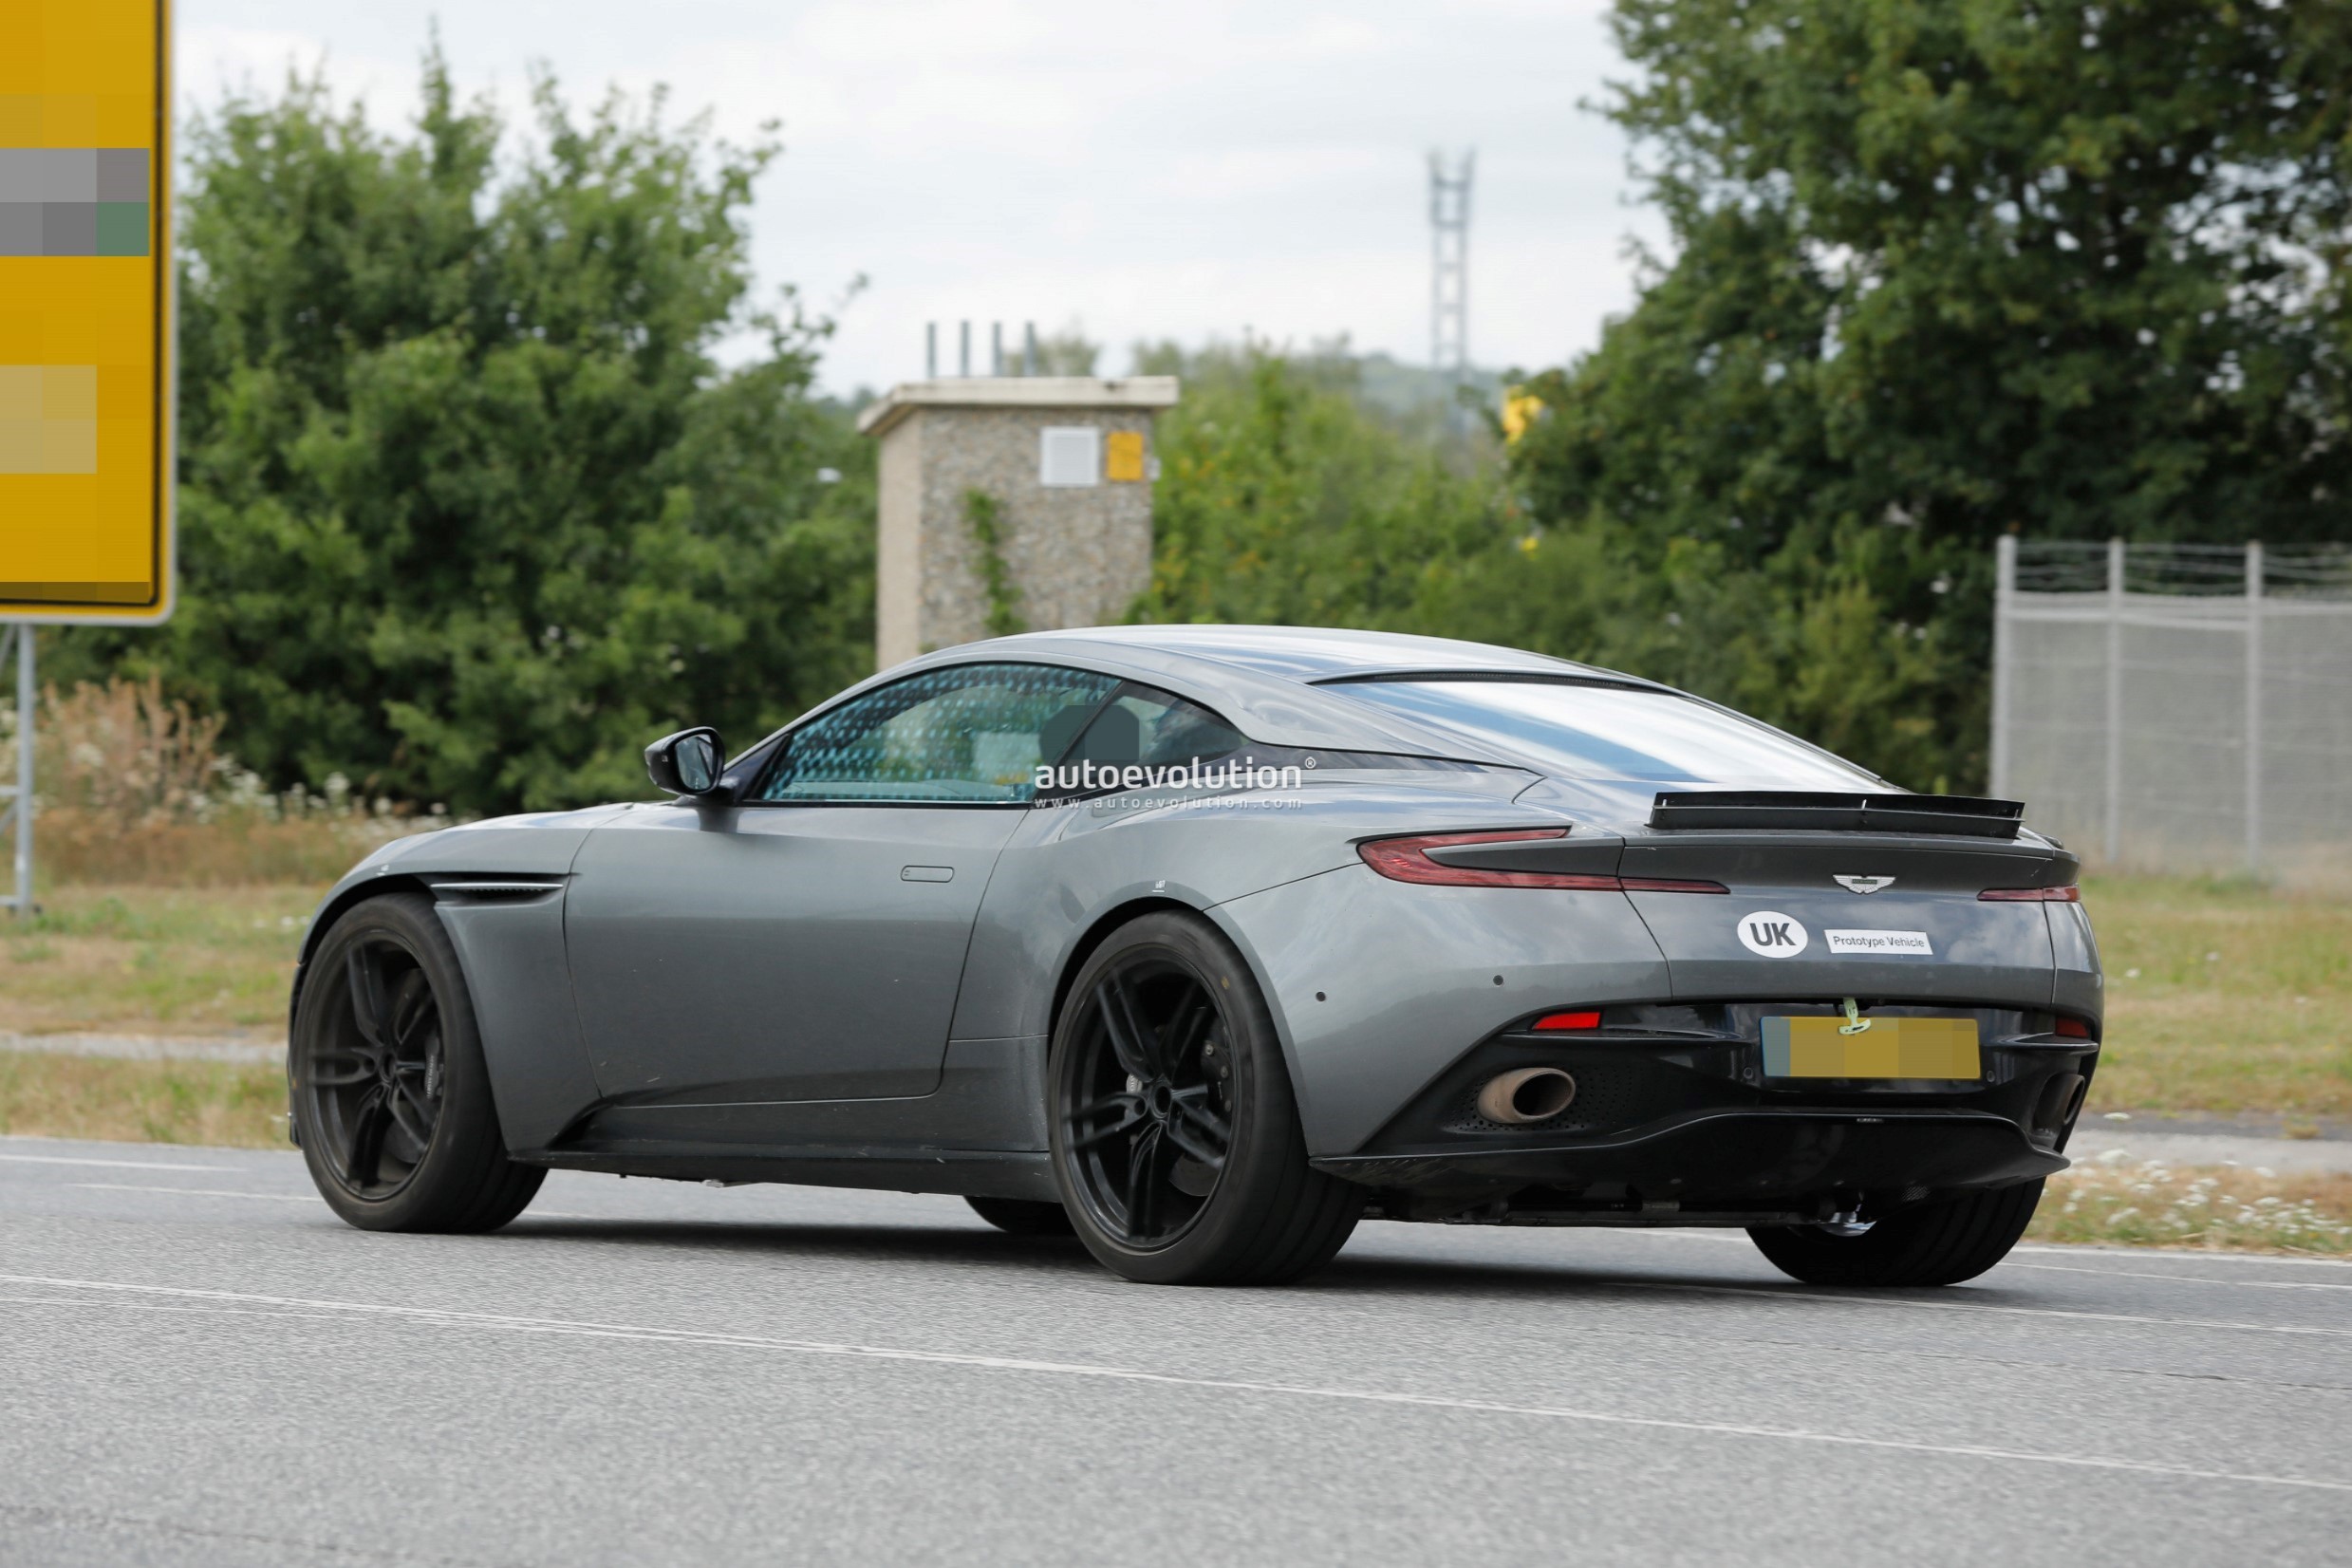 2024 Aston Martin Db11 Facelift Spied Testing Touchscreen Infotainment Confirmed 9 